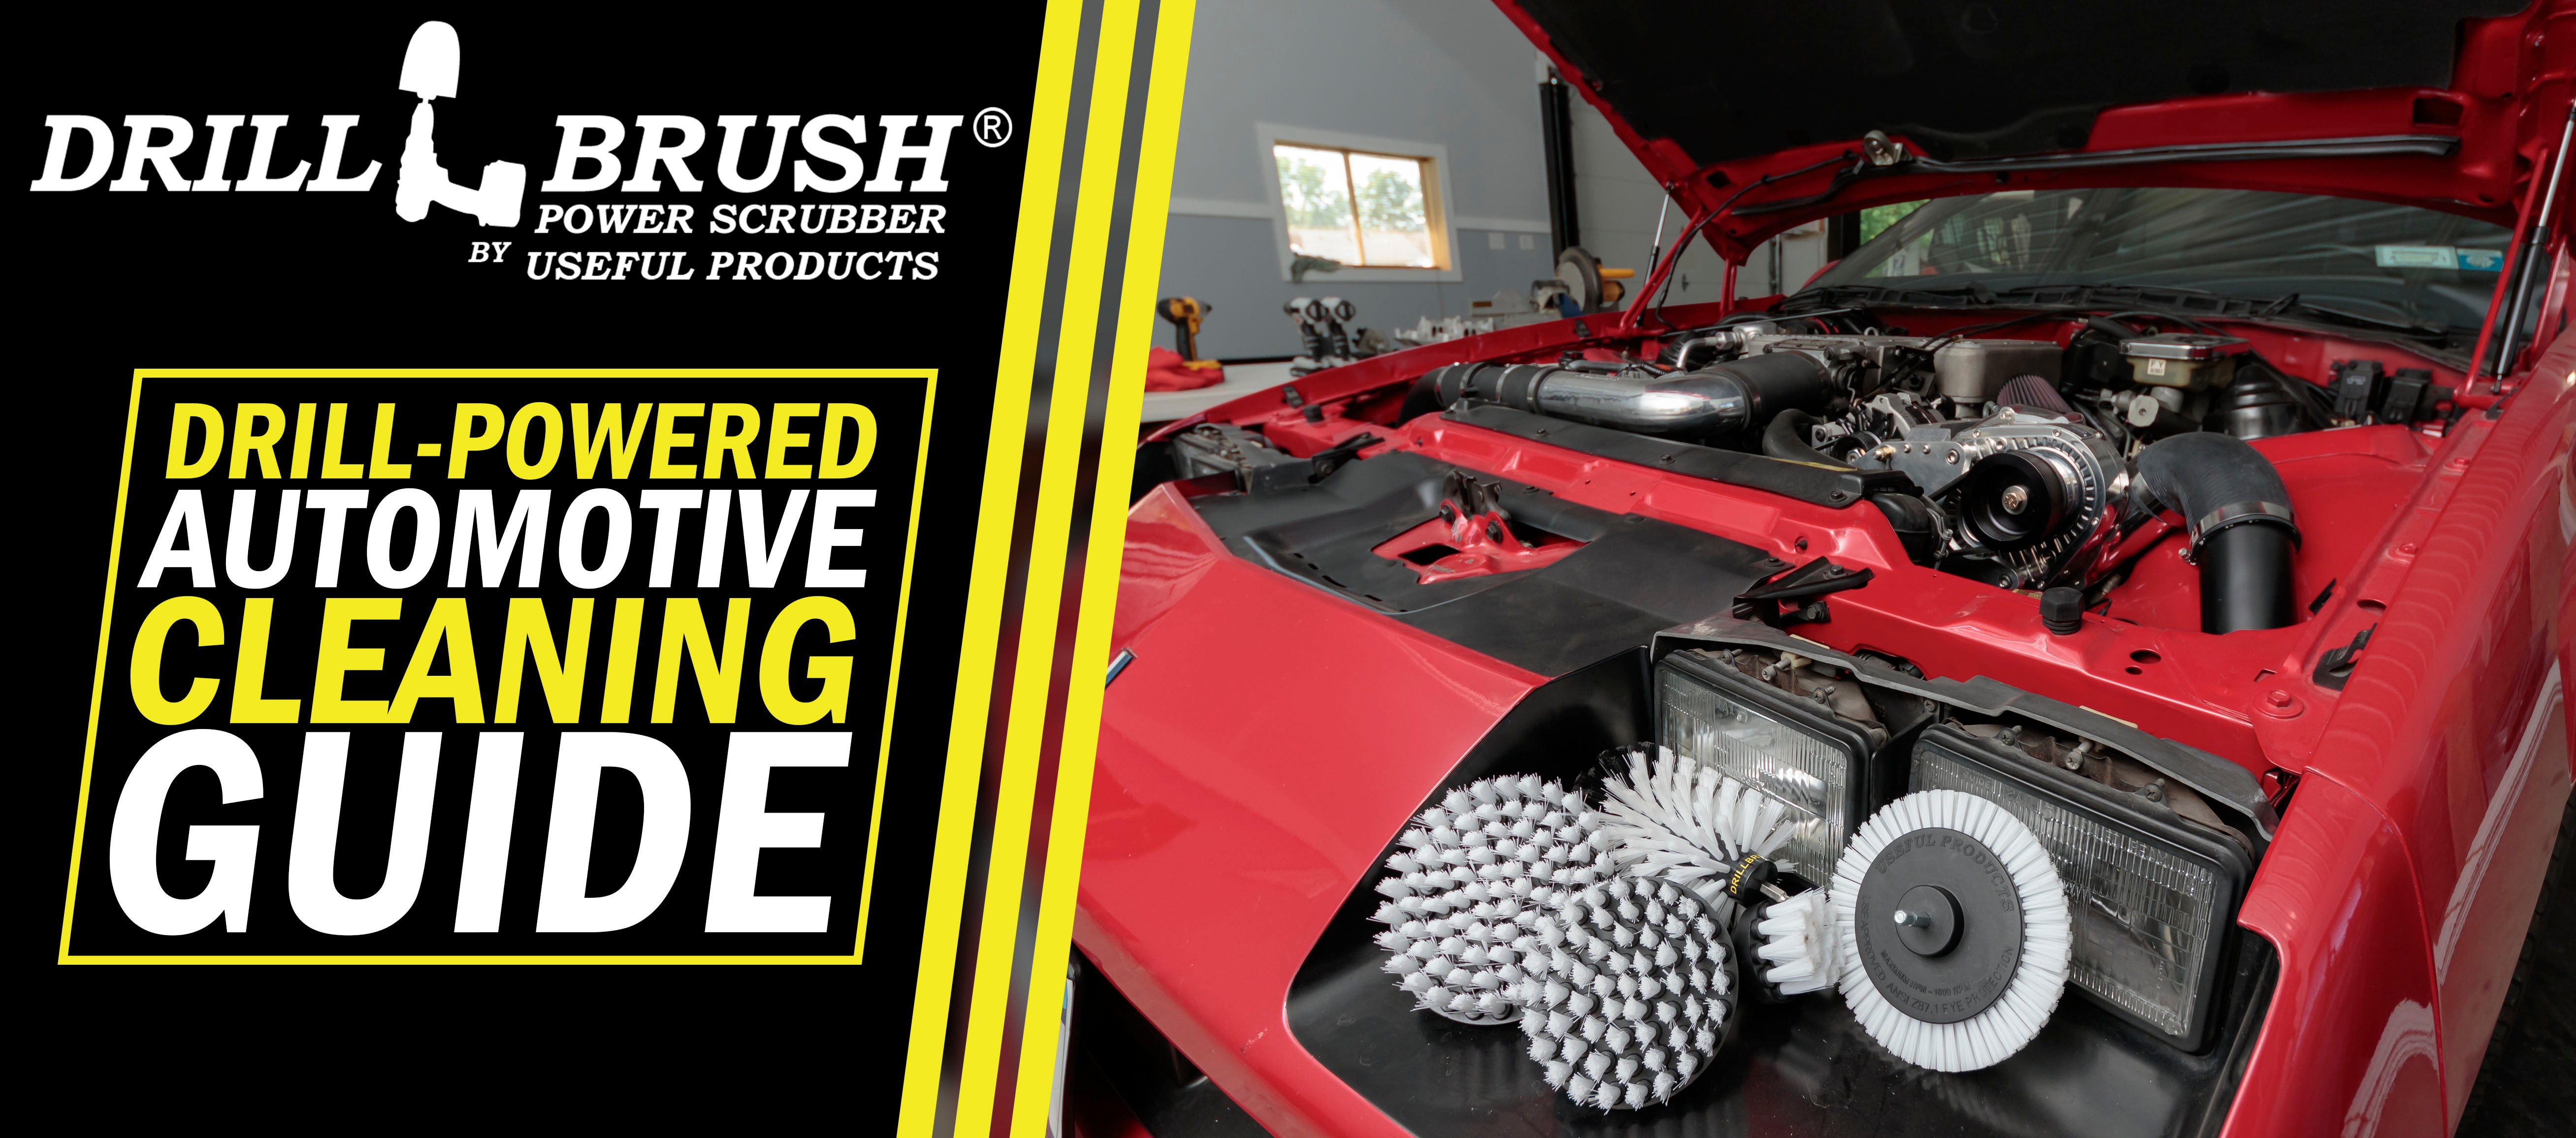 Using a Drillbrush for Faster Car Detailing and Vehicle Clean-up